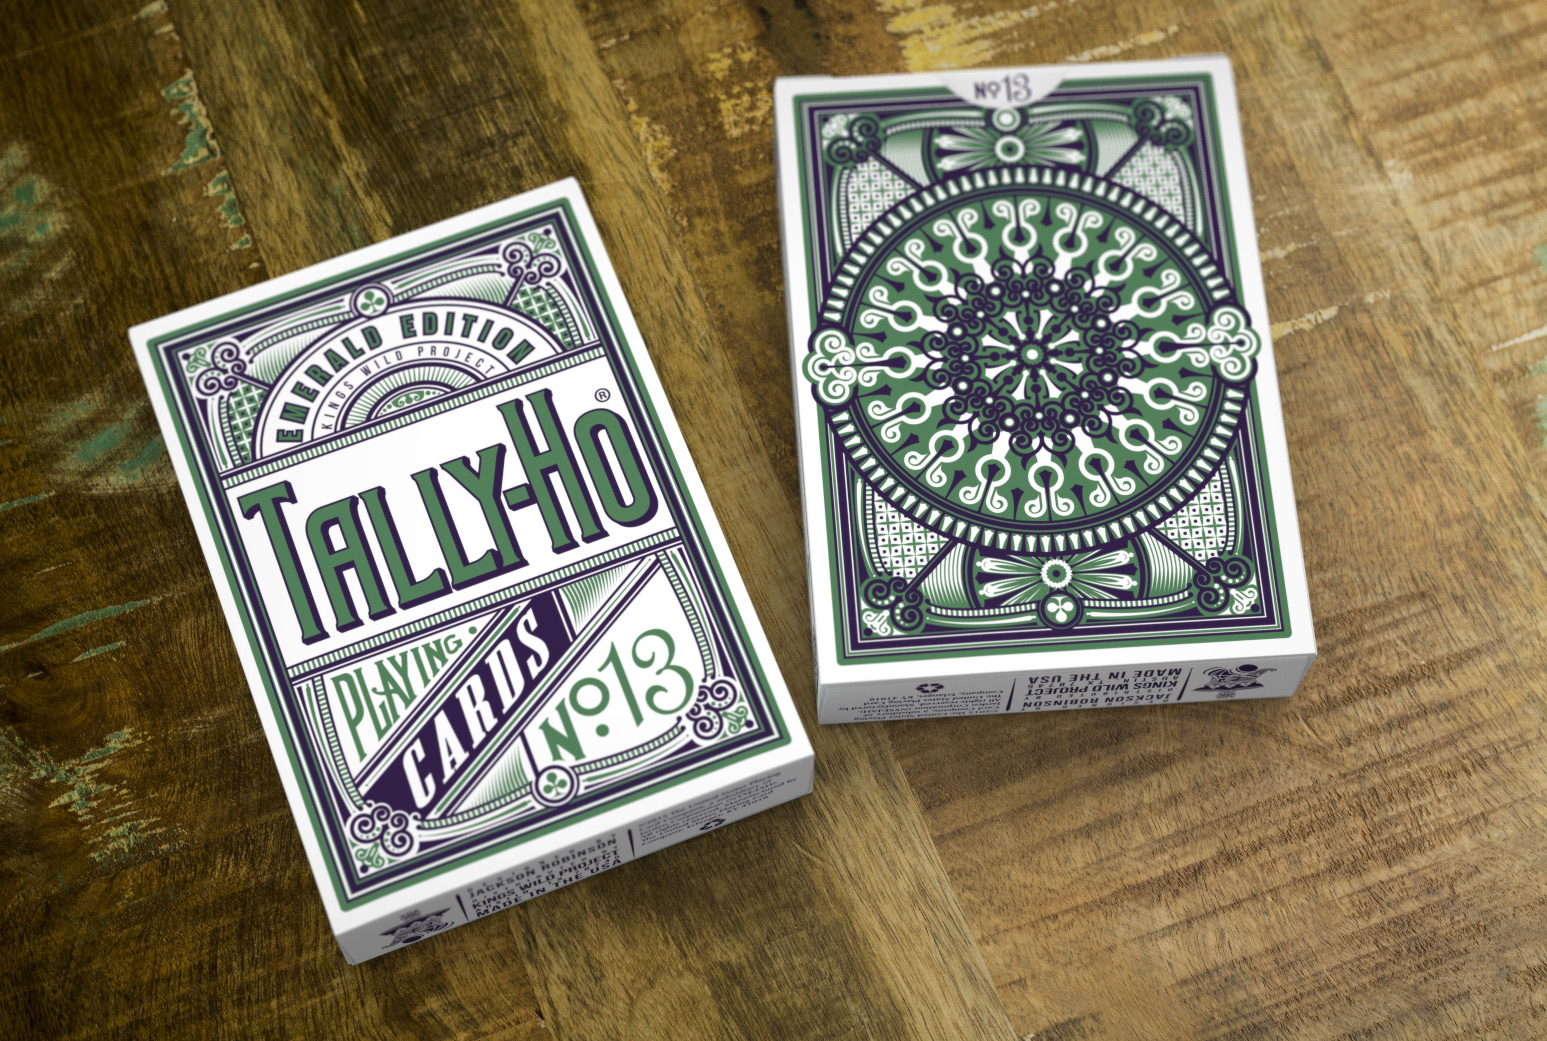 Limited 700 1 deck Emerald Tally Ho Playing Cards S102466-乙E3 